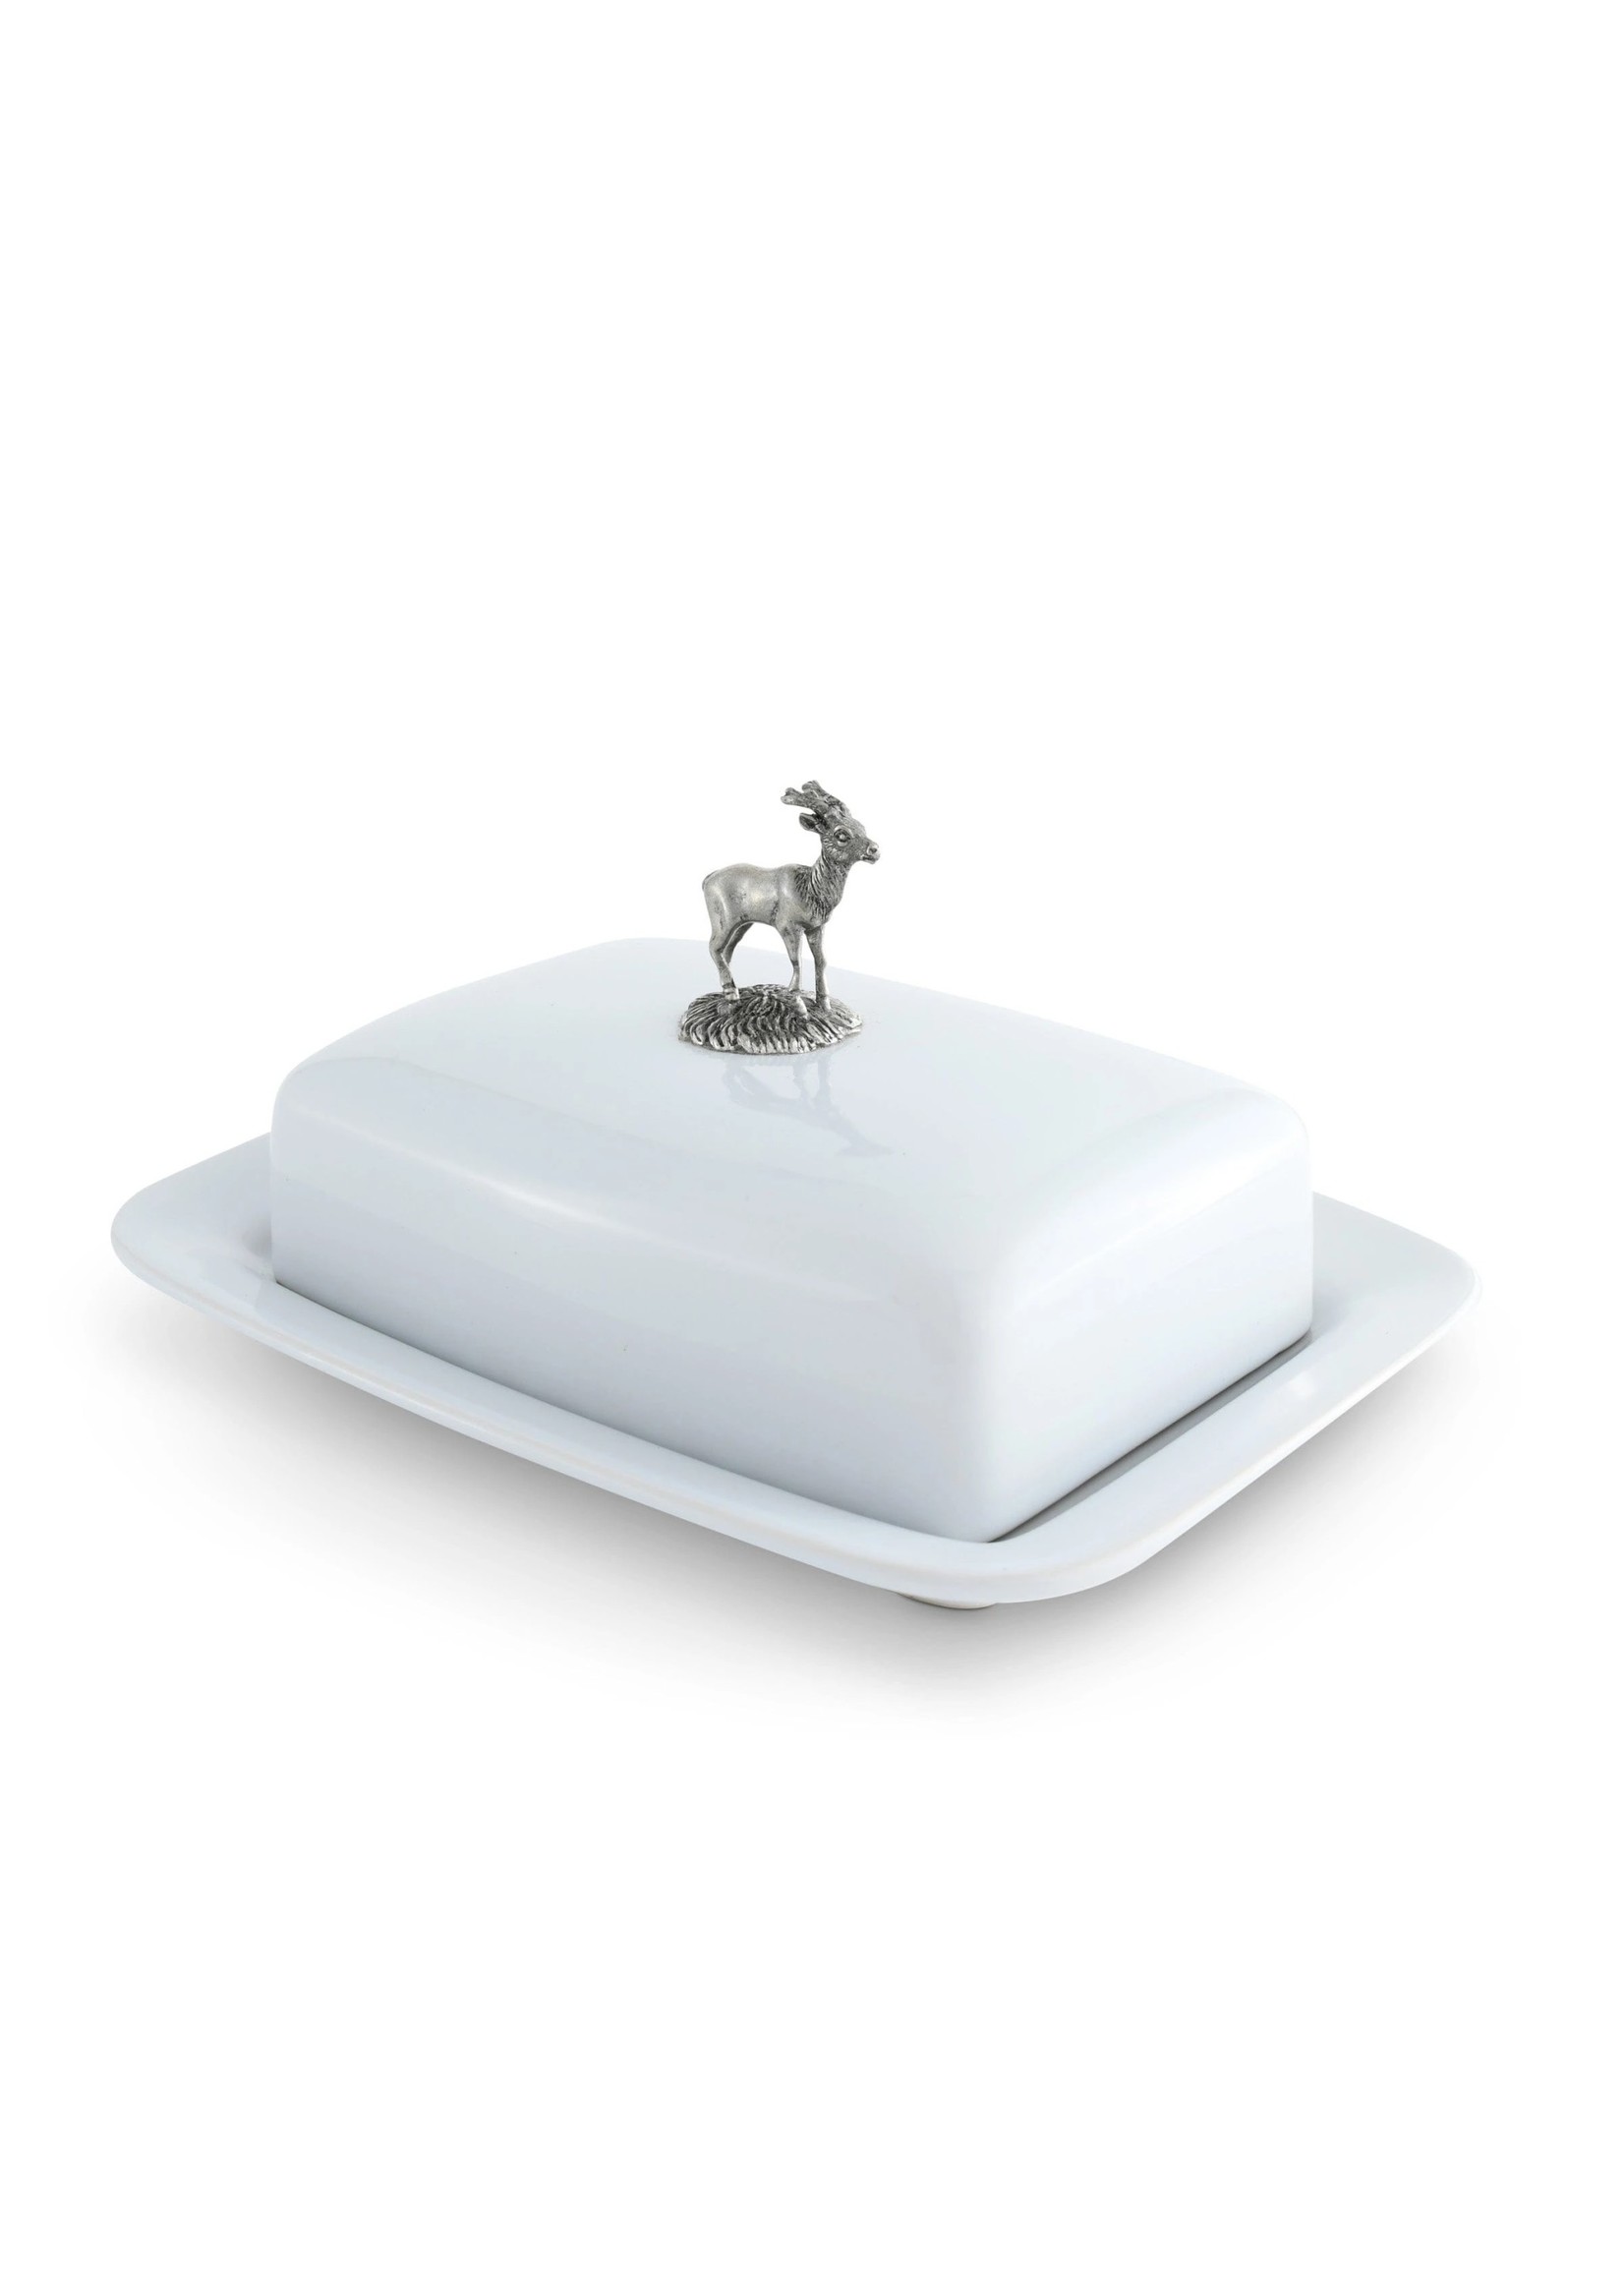 Butter Dish - Stag